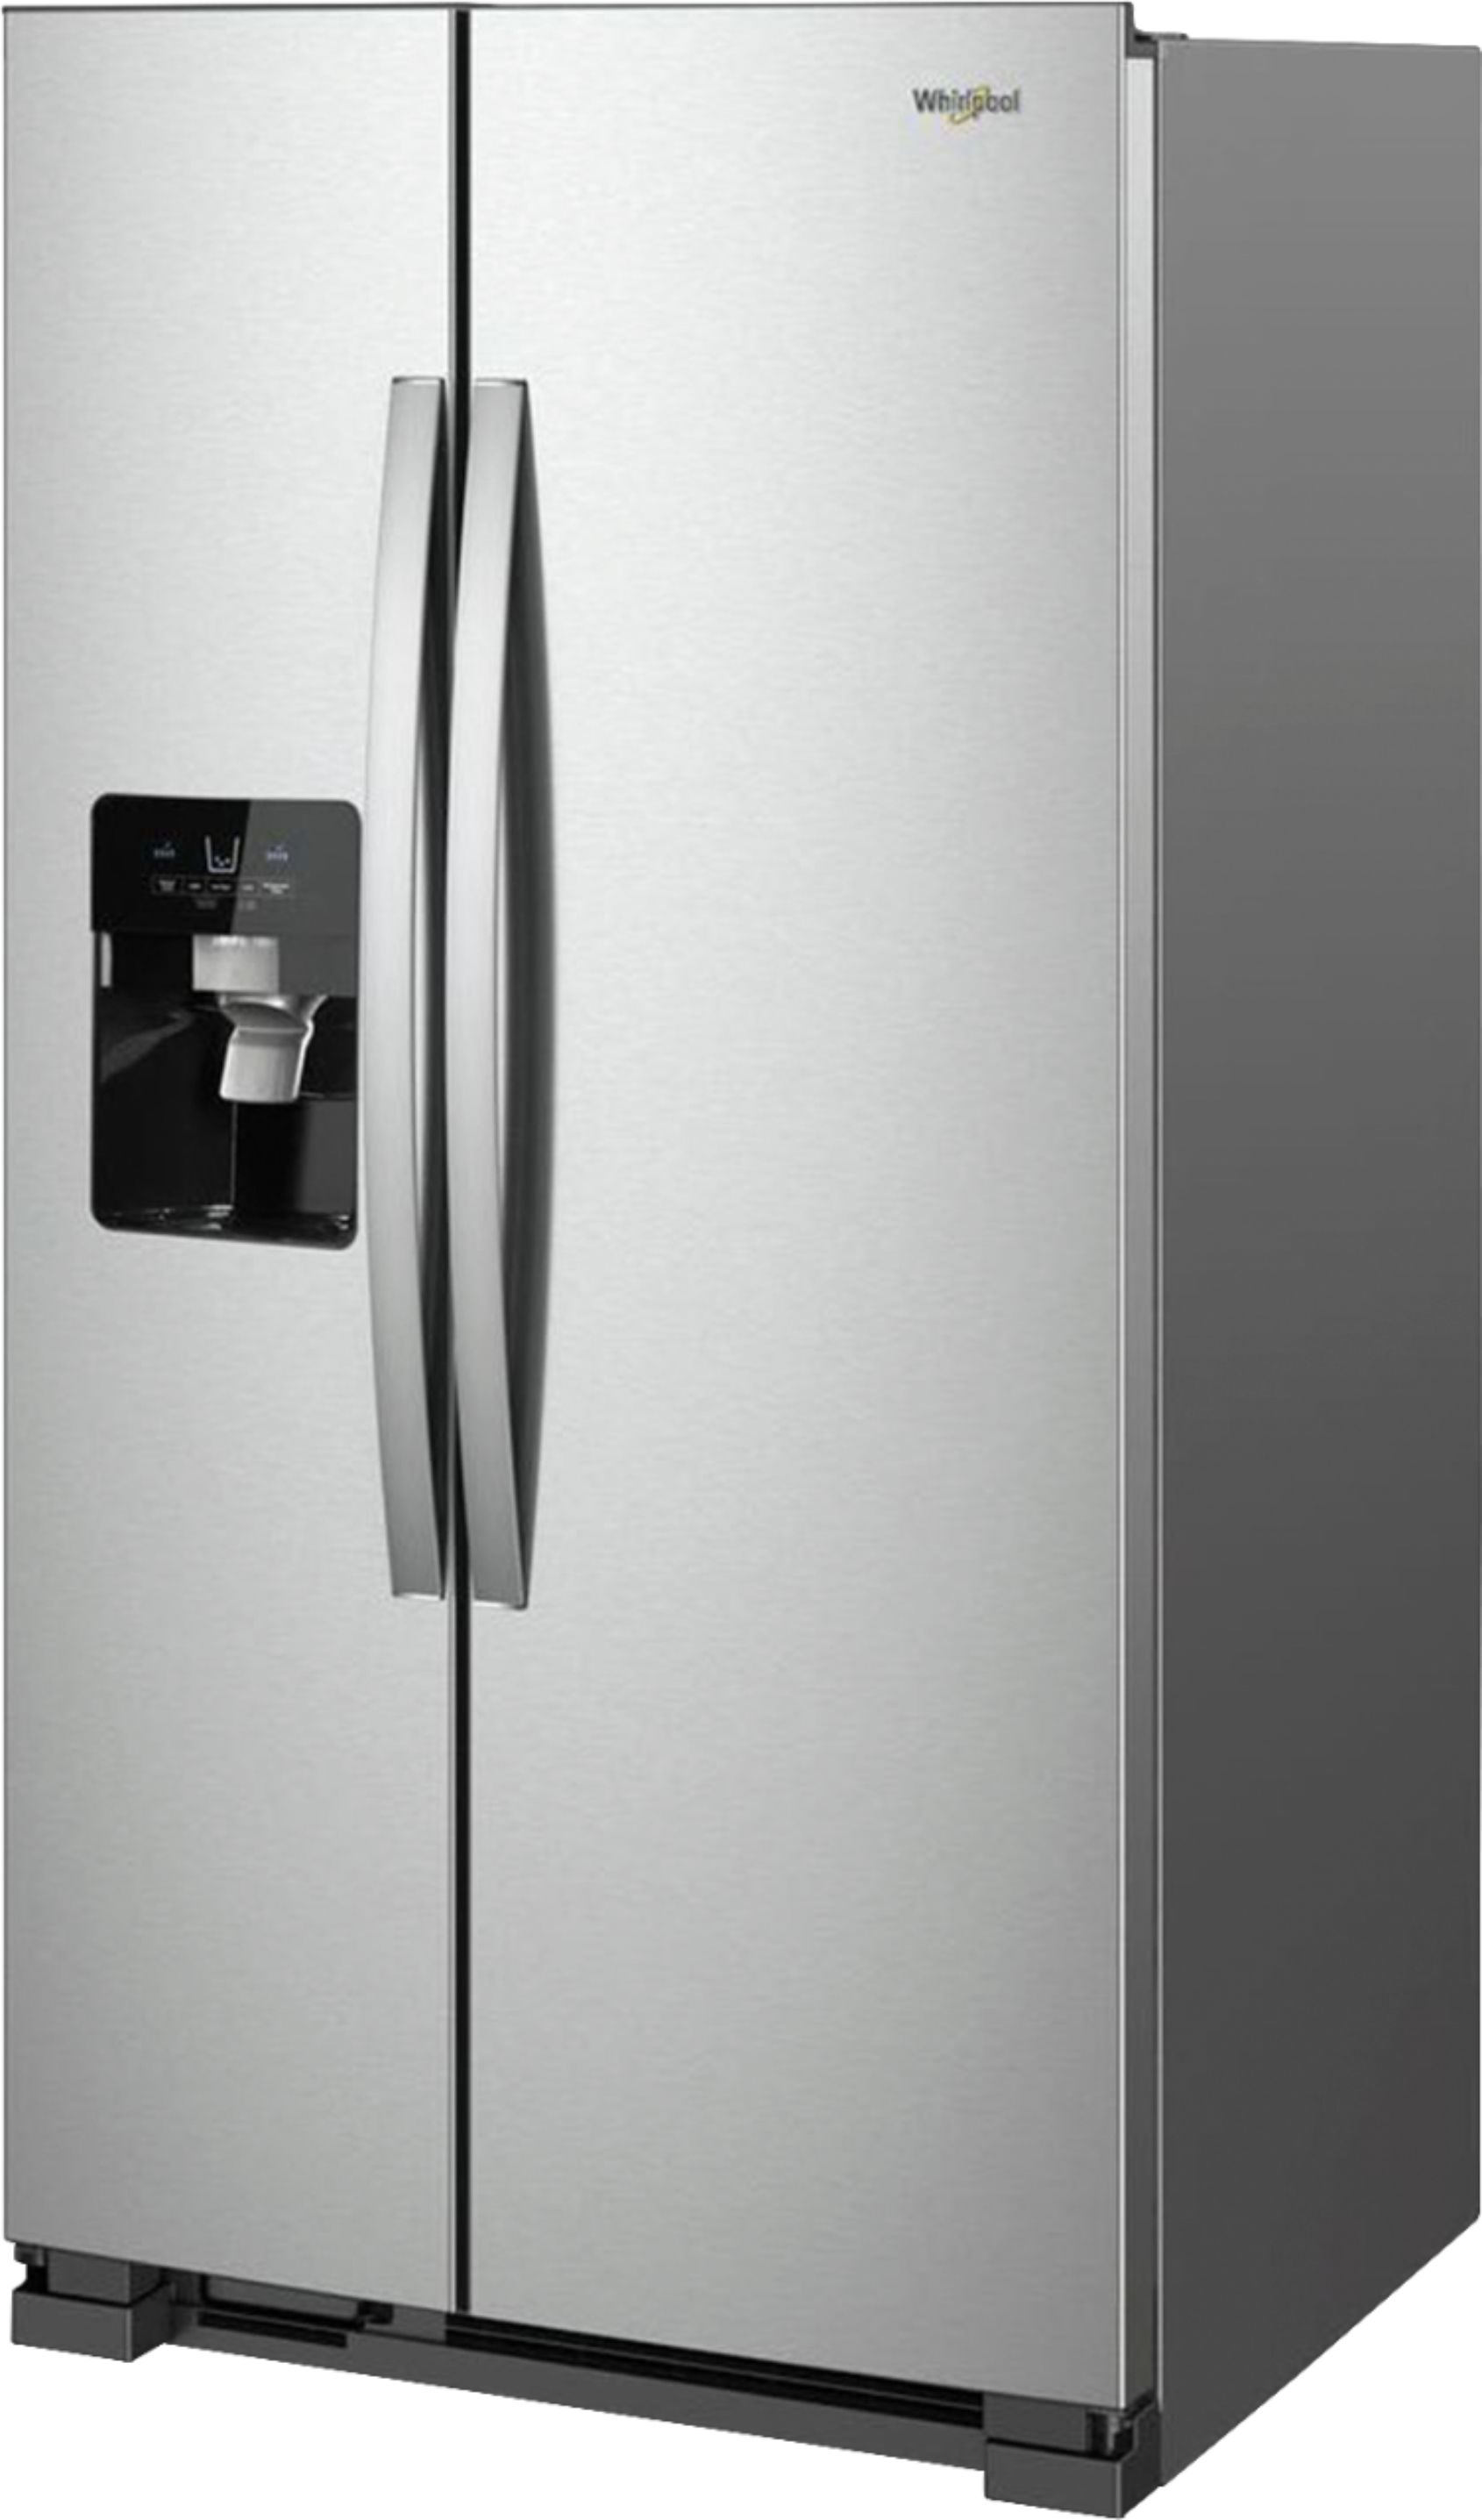 Left View: Whirlpool - 24.5 Cu. Ft. Side-by-Side Refrigerator - Black Stainless Steel